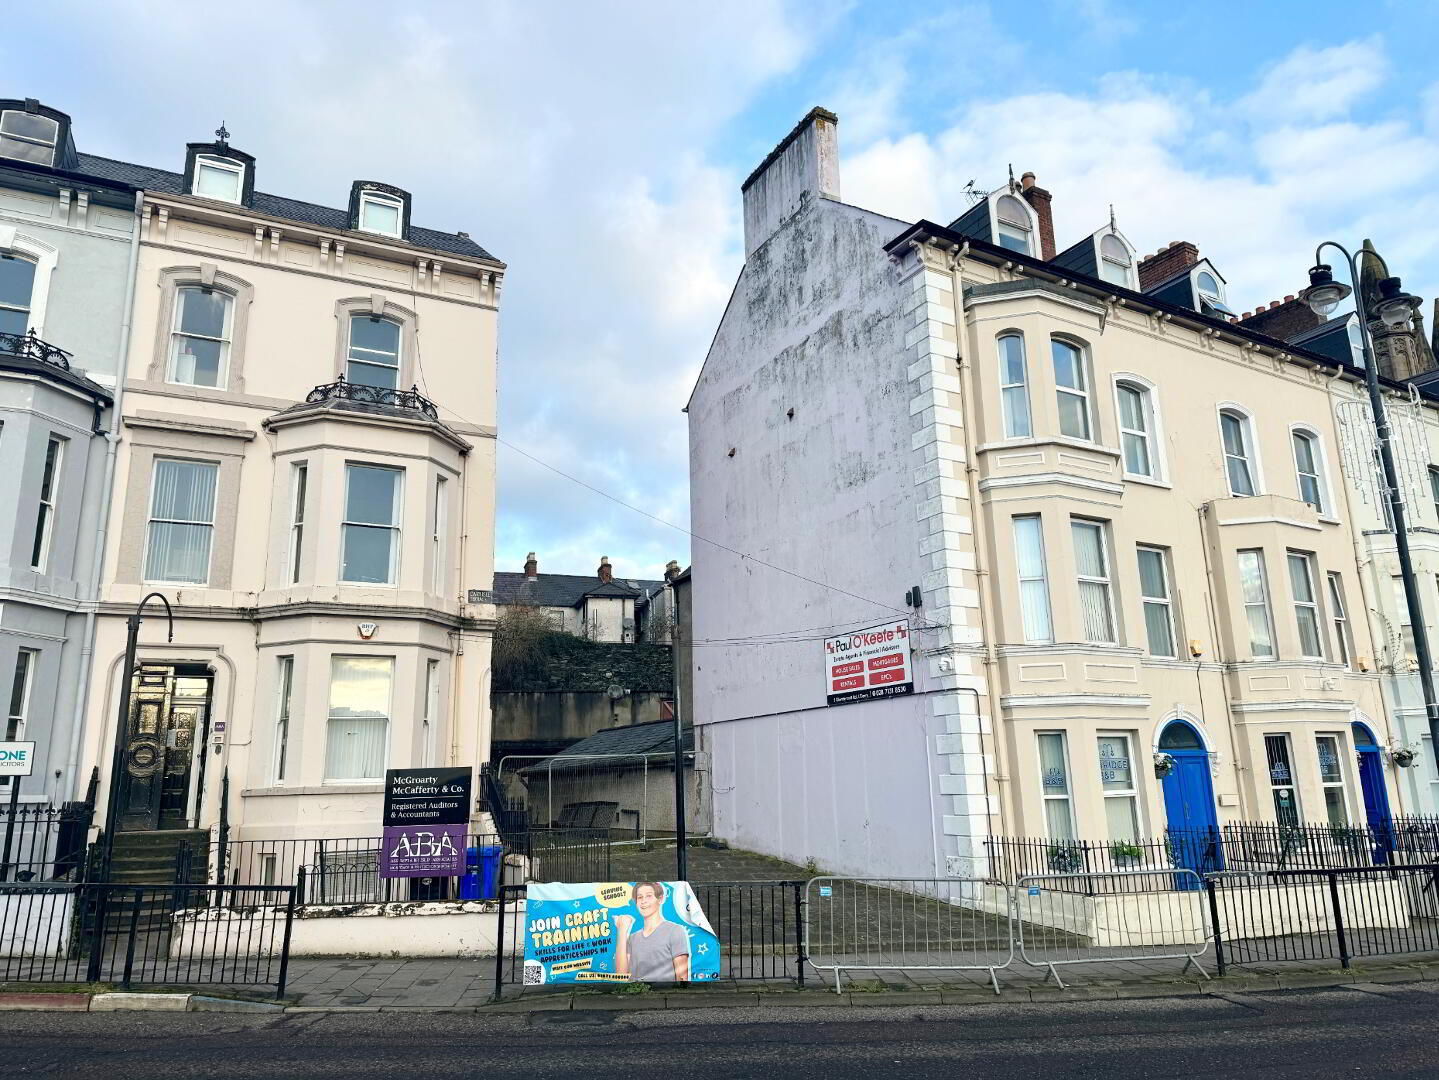 PLANNING PERMISSION FOR 7 X 1 Bed APTS, 1 Dacre Terrace